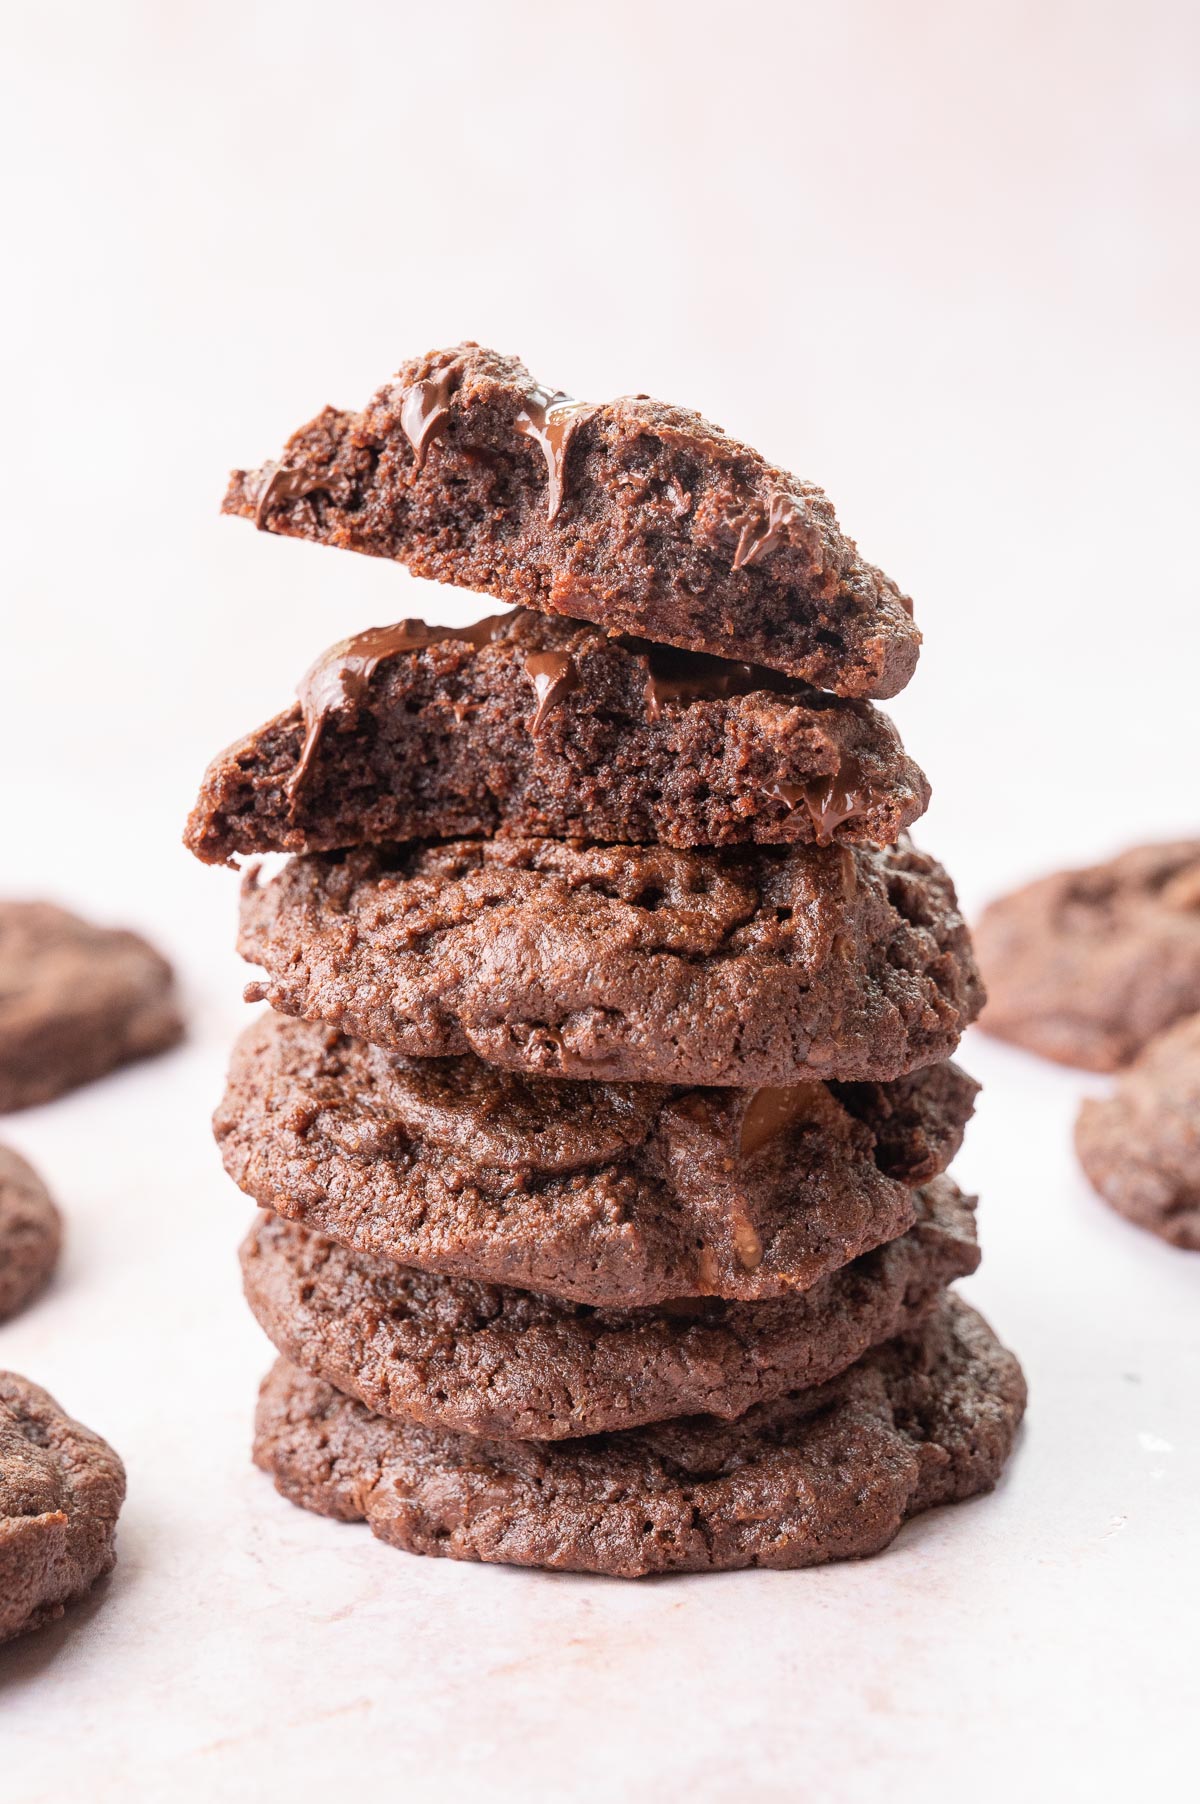 A stack of double chocolate chip cookies. The top cookie is broken in half to show the inside.